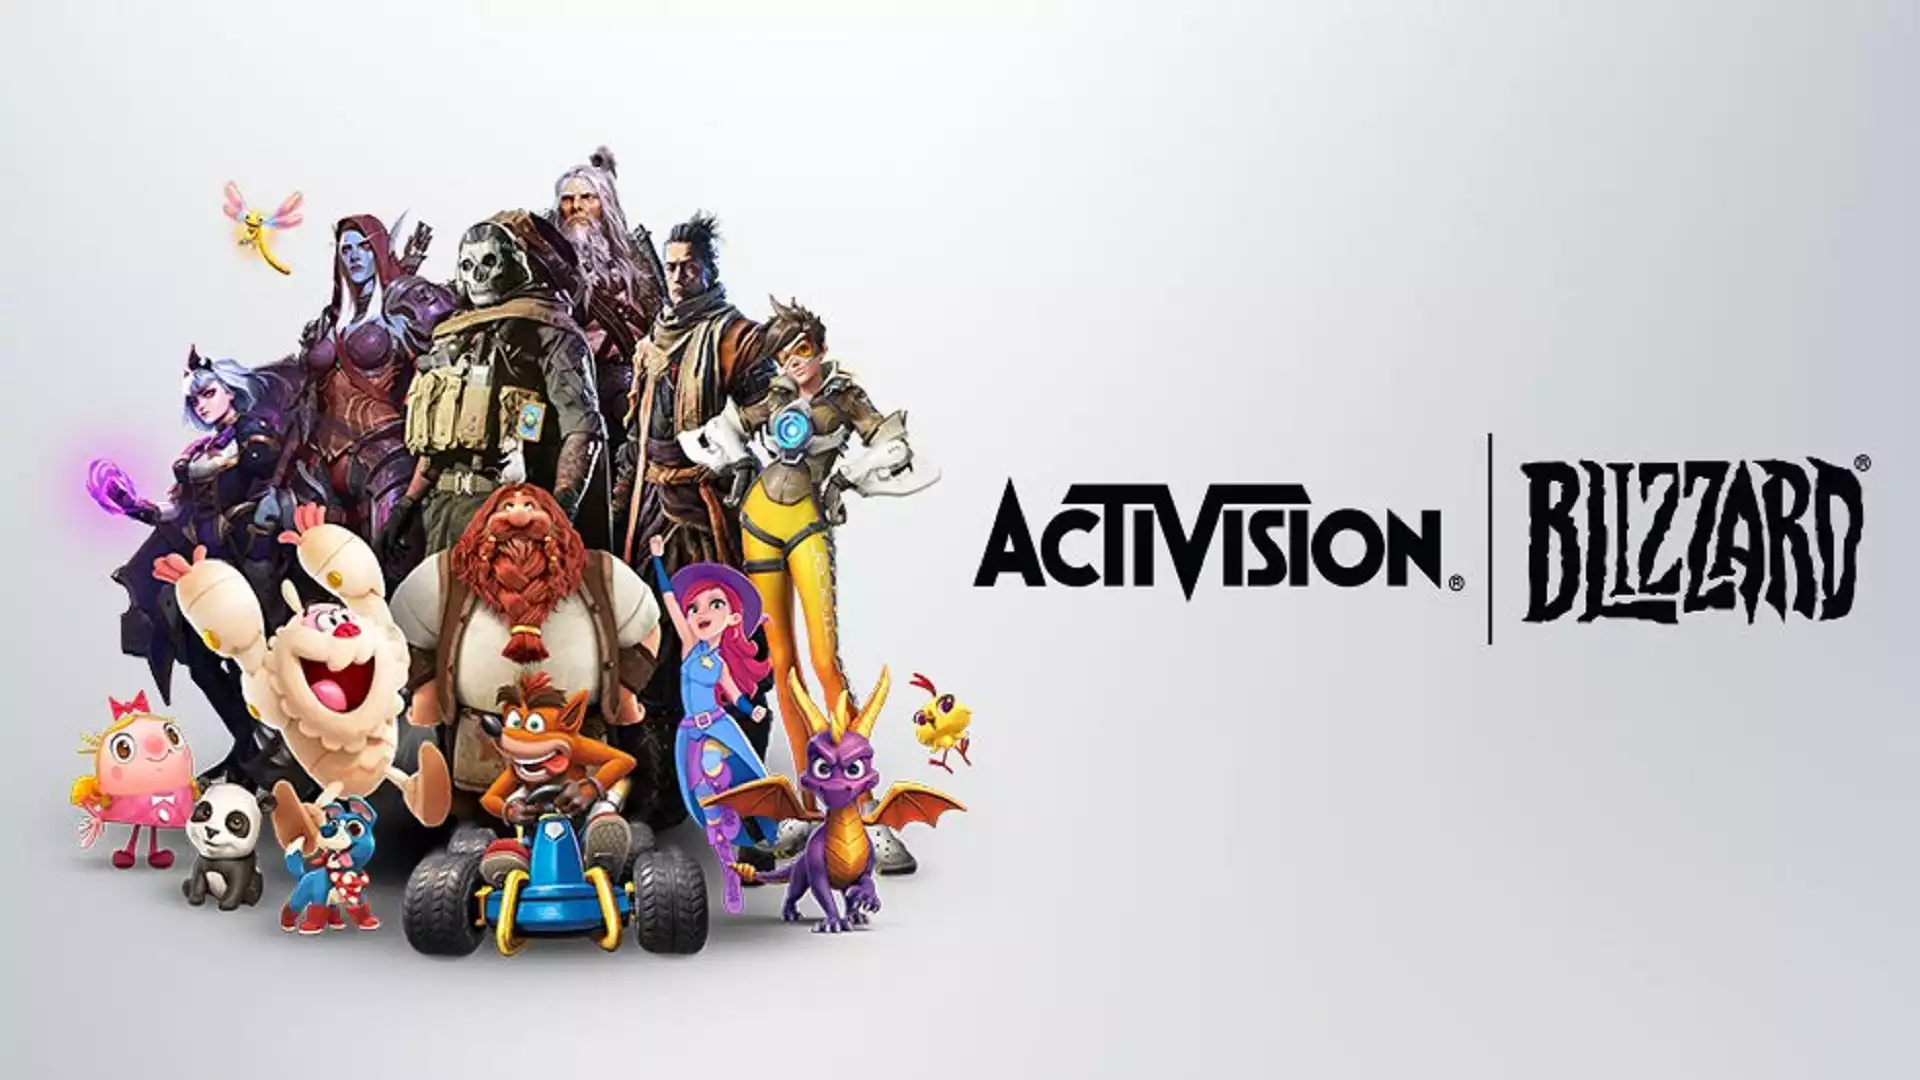 Activision was planning job cuts before acquisition, Microsoft tells FTC